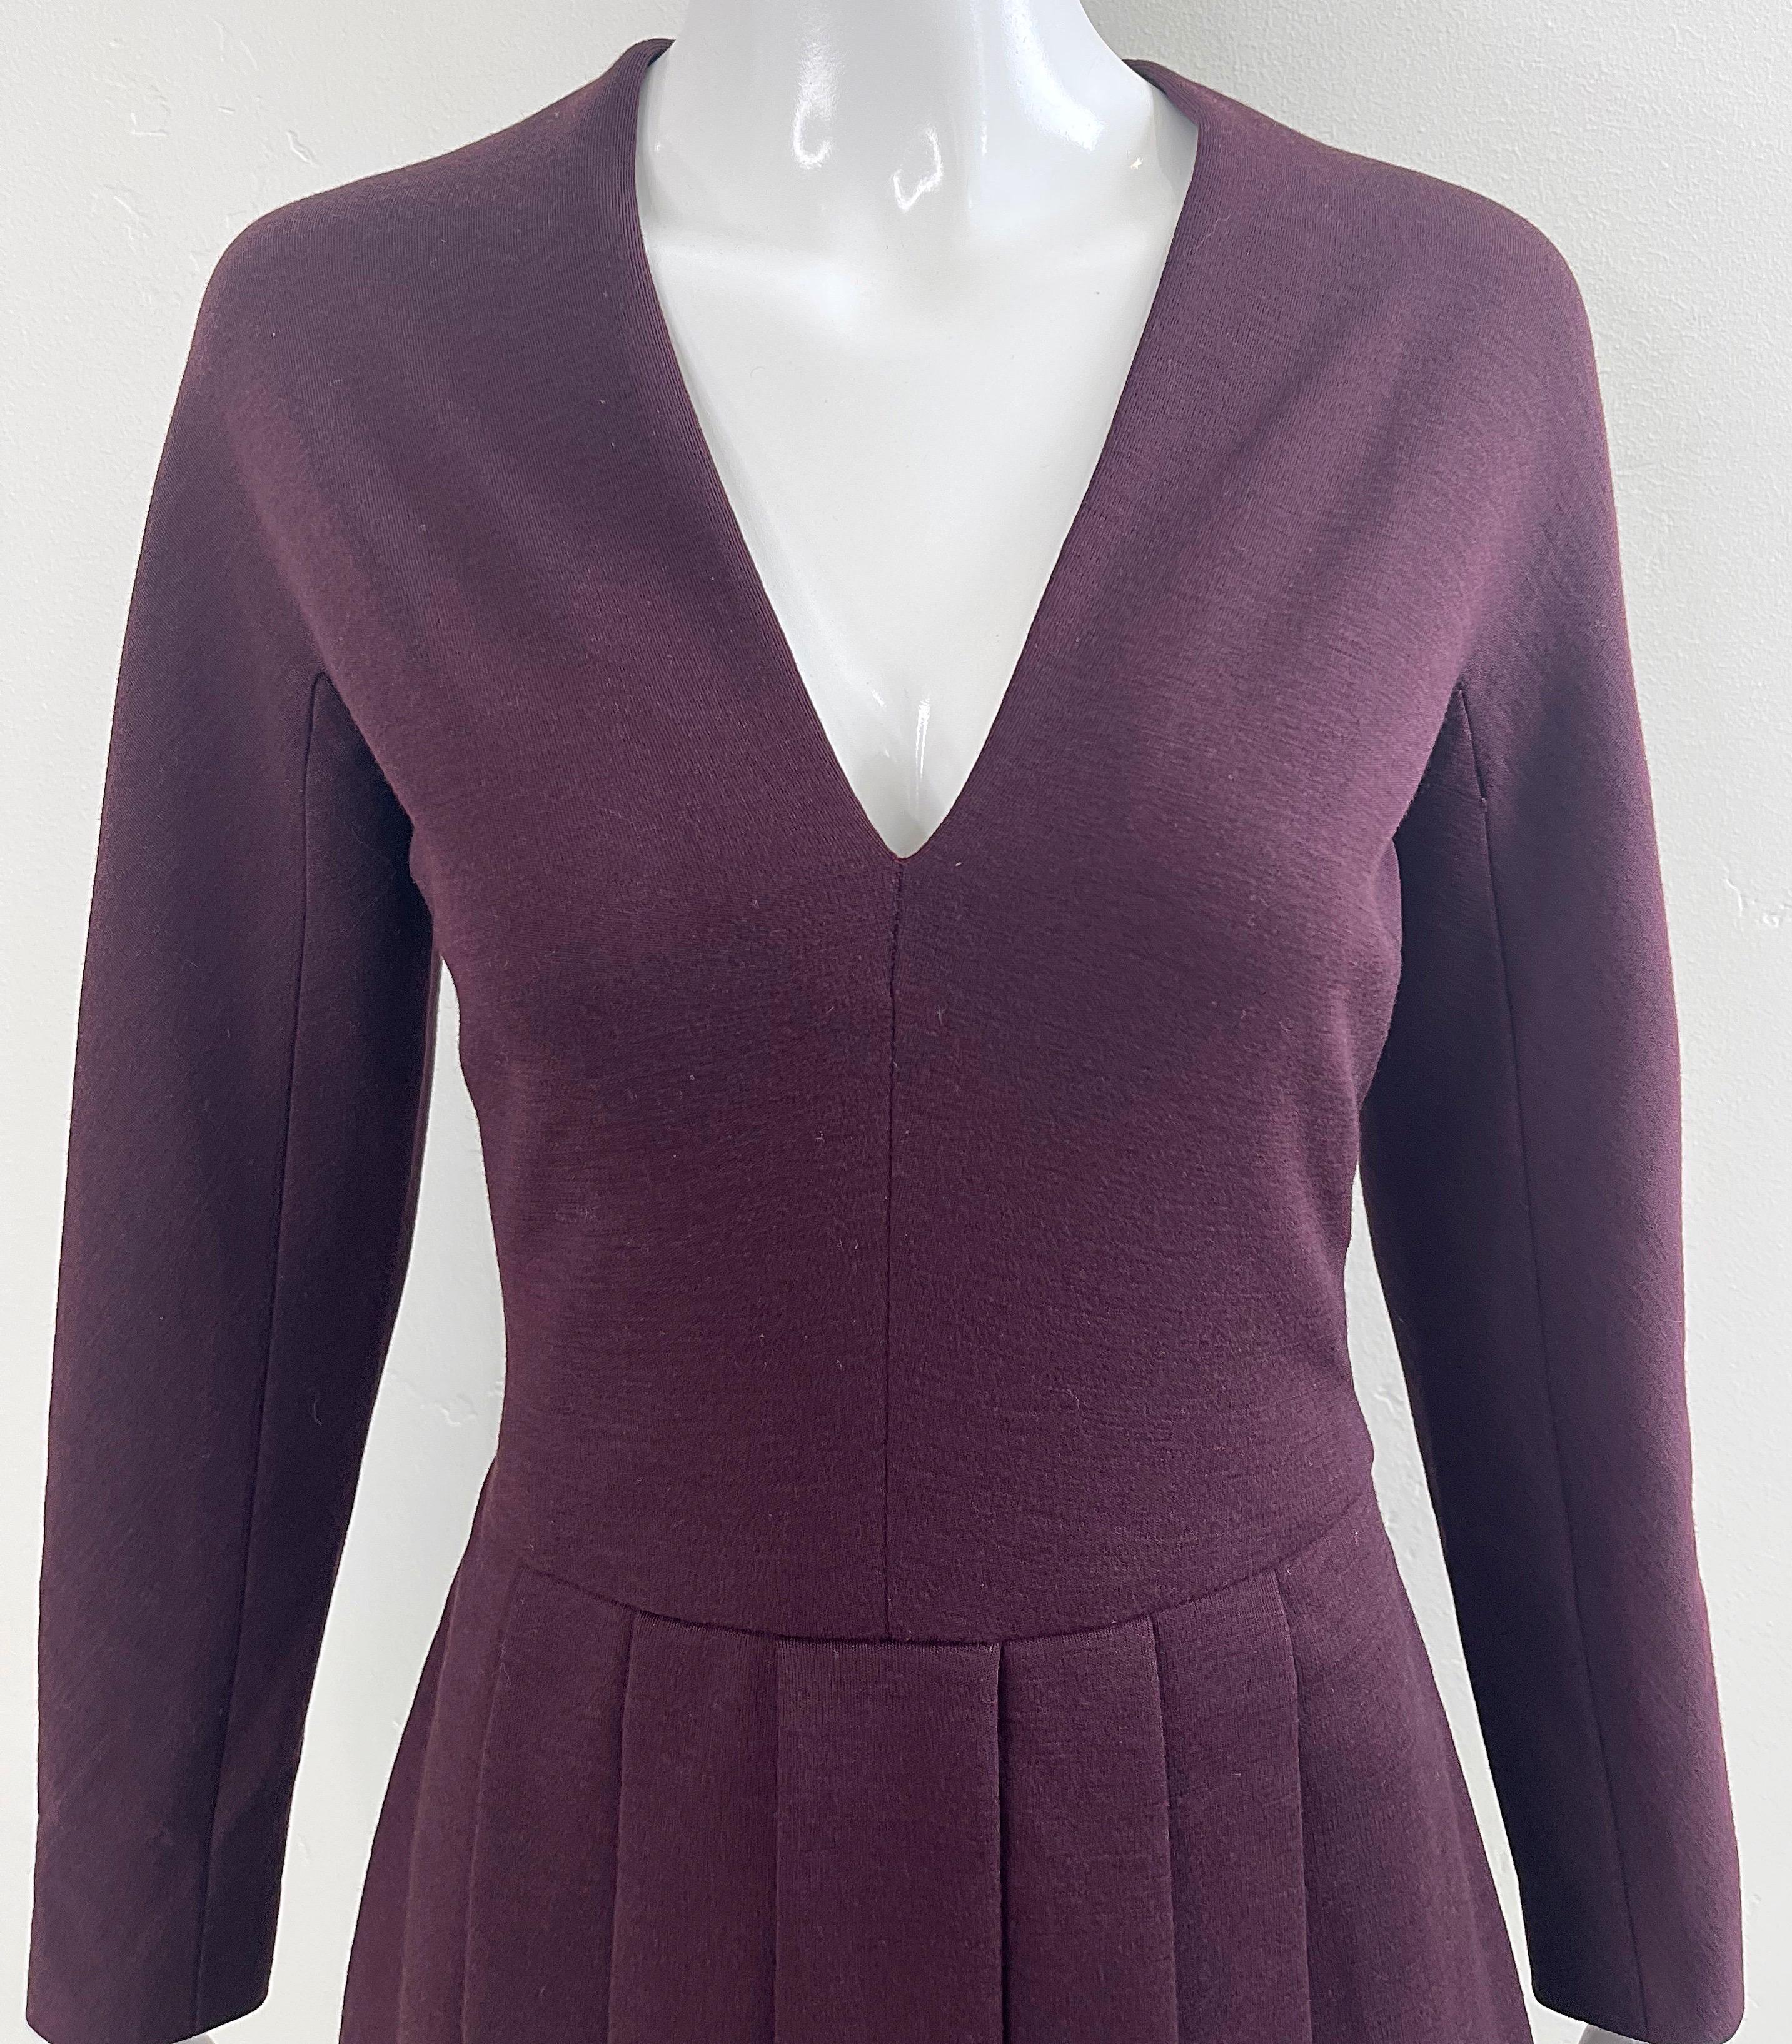 Pauline Trigere 1970s Burgundy Maroon Wool Long Sleeve Vintage 70s Mini Dress In Excellent Condition For Sale In San Diego, CA